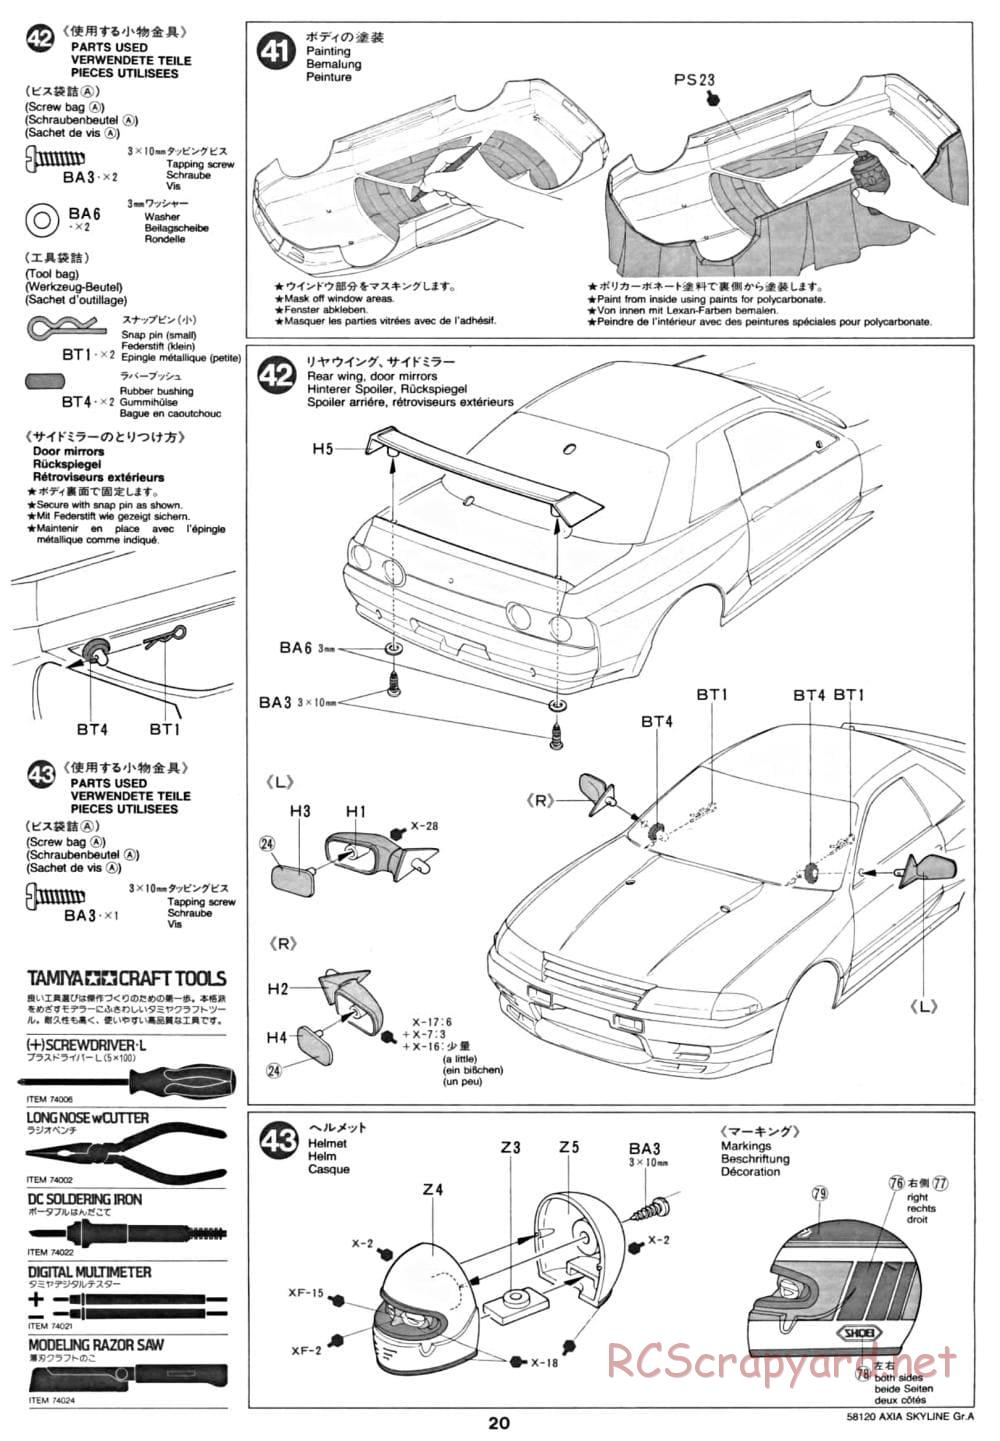 Tamiya - Axia Skyline GT-R Gr.A - TA-01 Chassis - Manual - Page 21